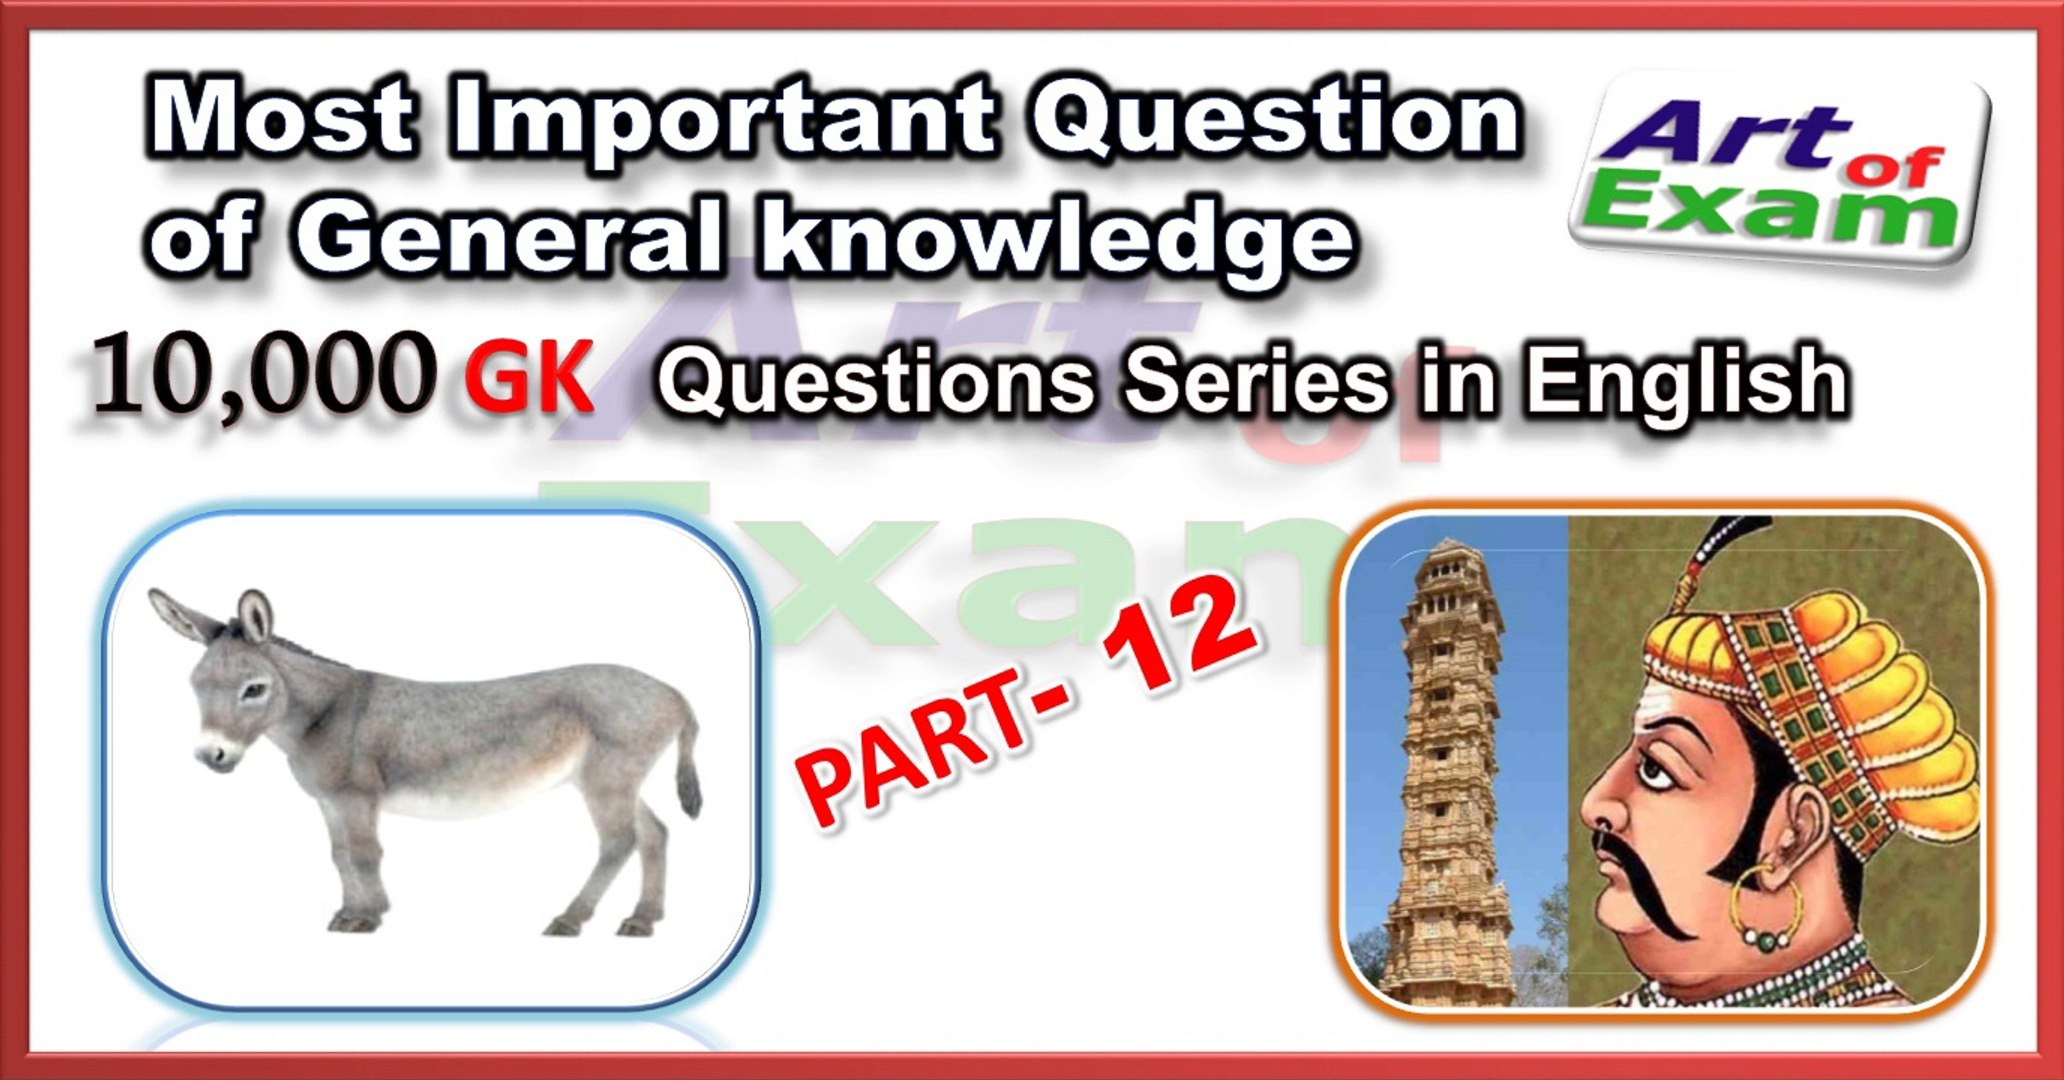 Gk Question And Answers Part 12 For All Competitive Exams Like